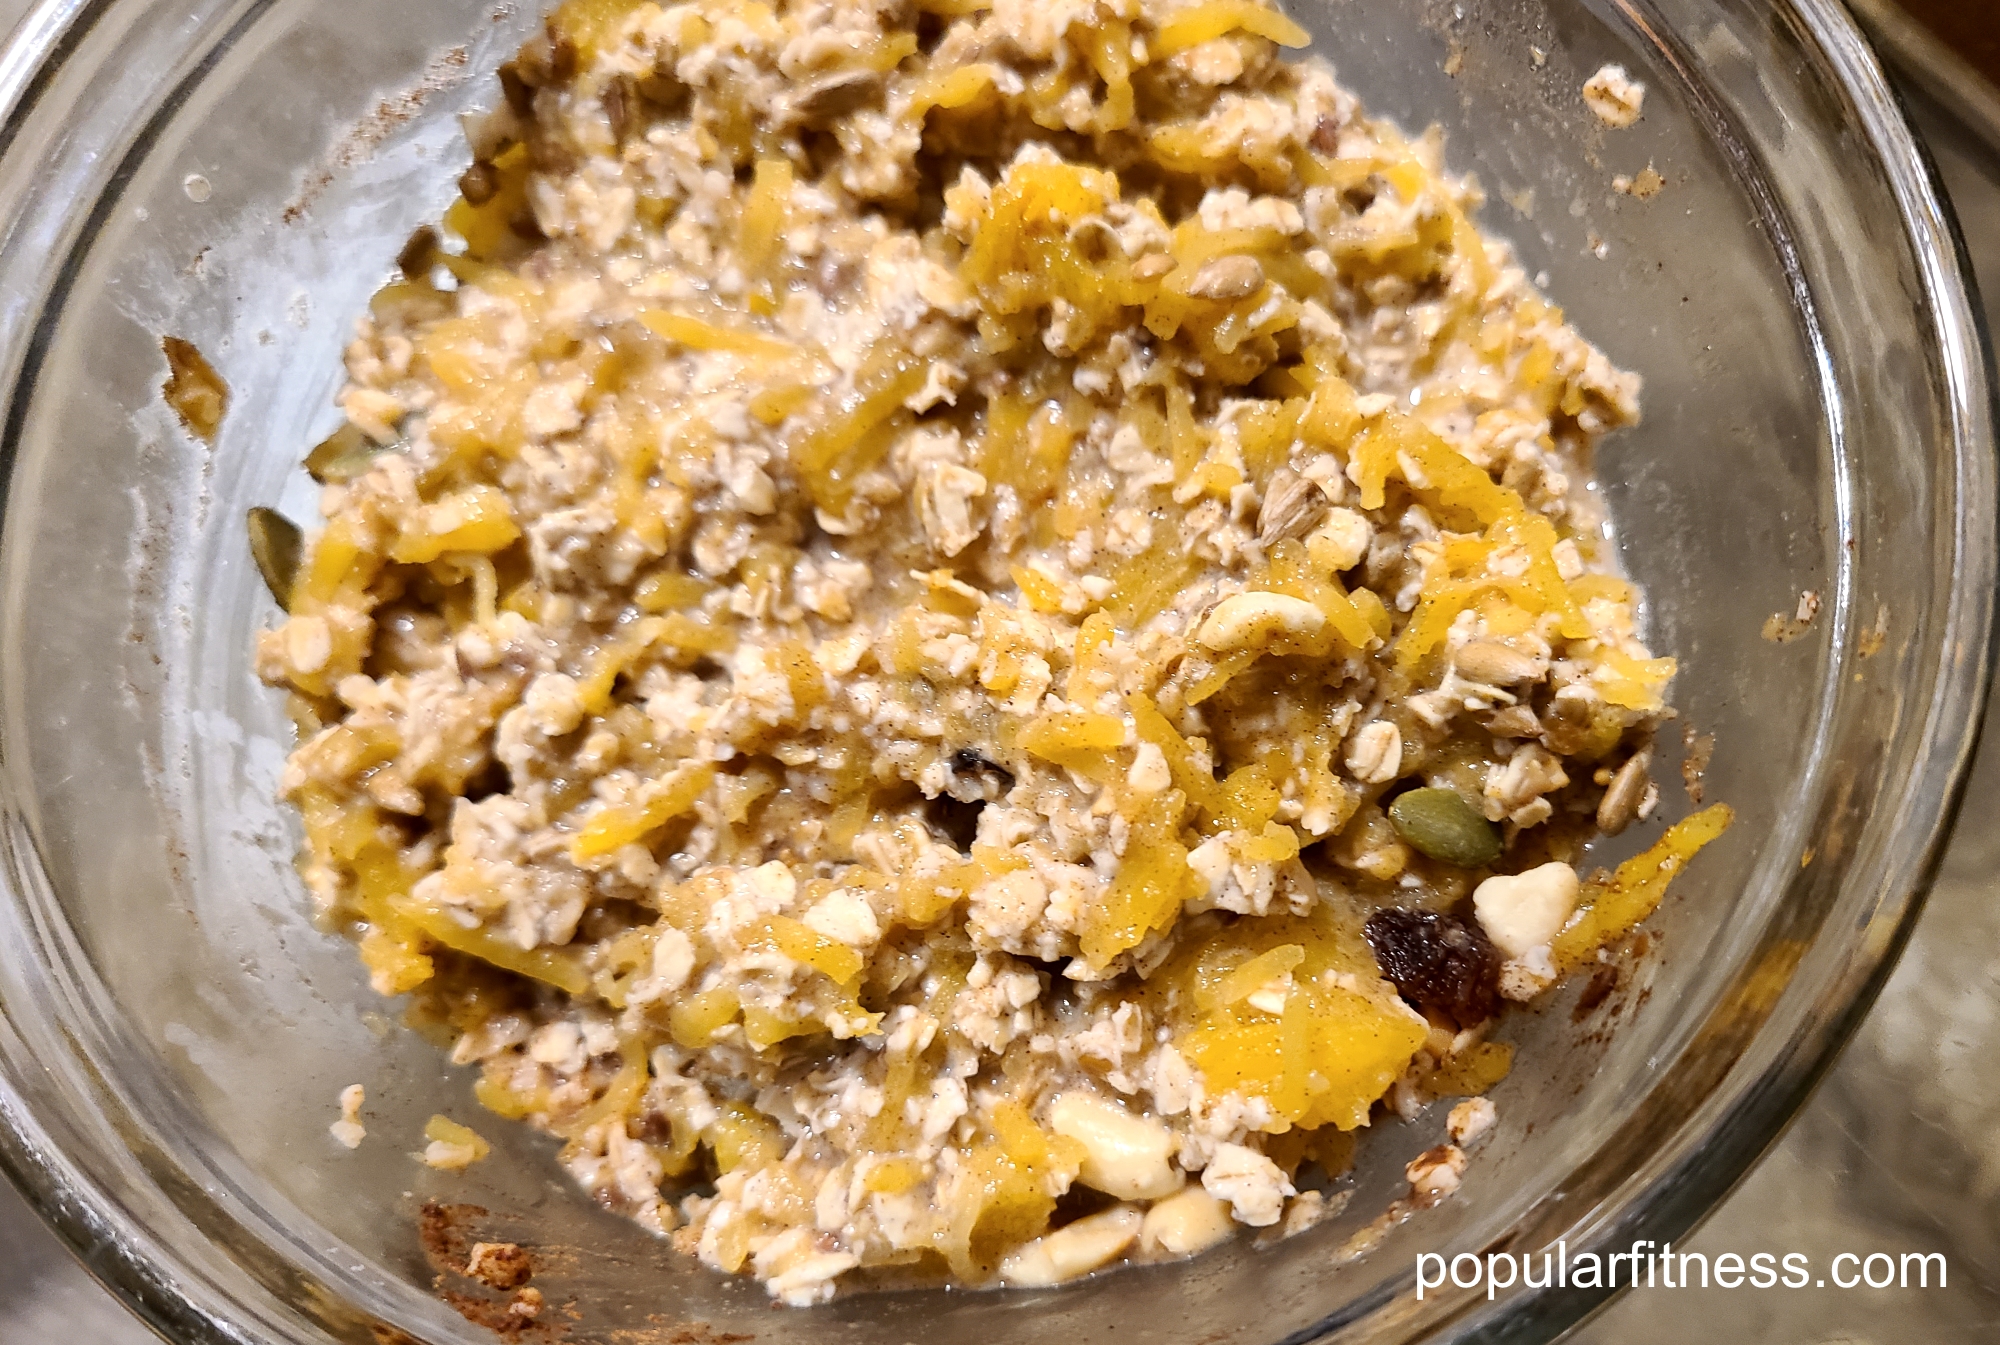 Oatmeal with pumpkin and nuts - Photo by popular fitness